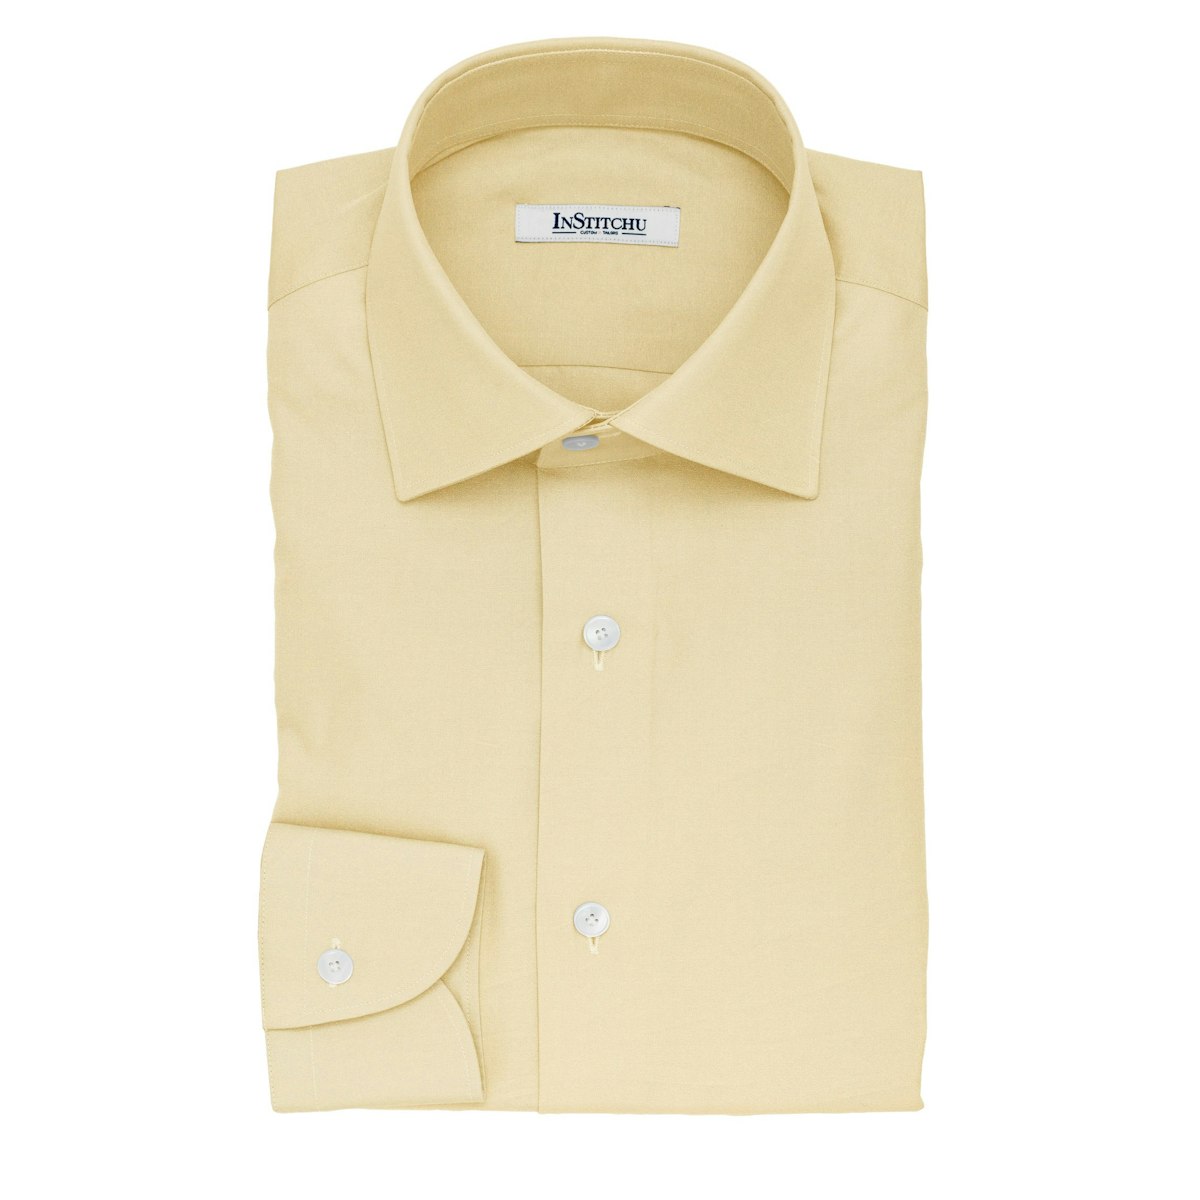 InStitchu Collection The Masefield Beige Cotton Shirt